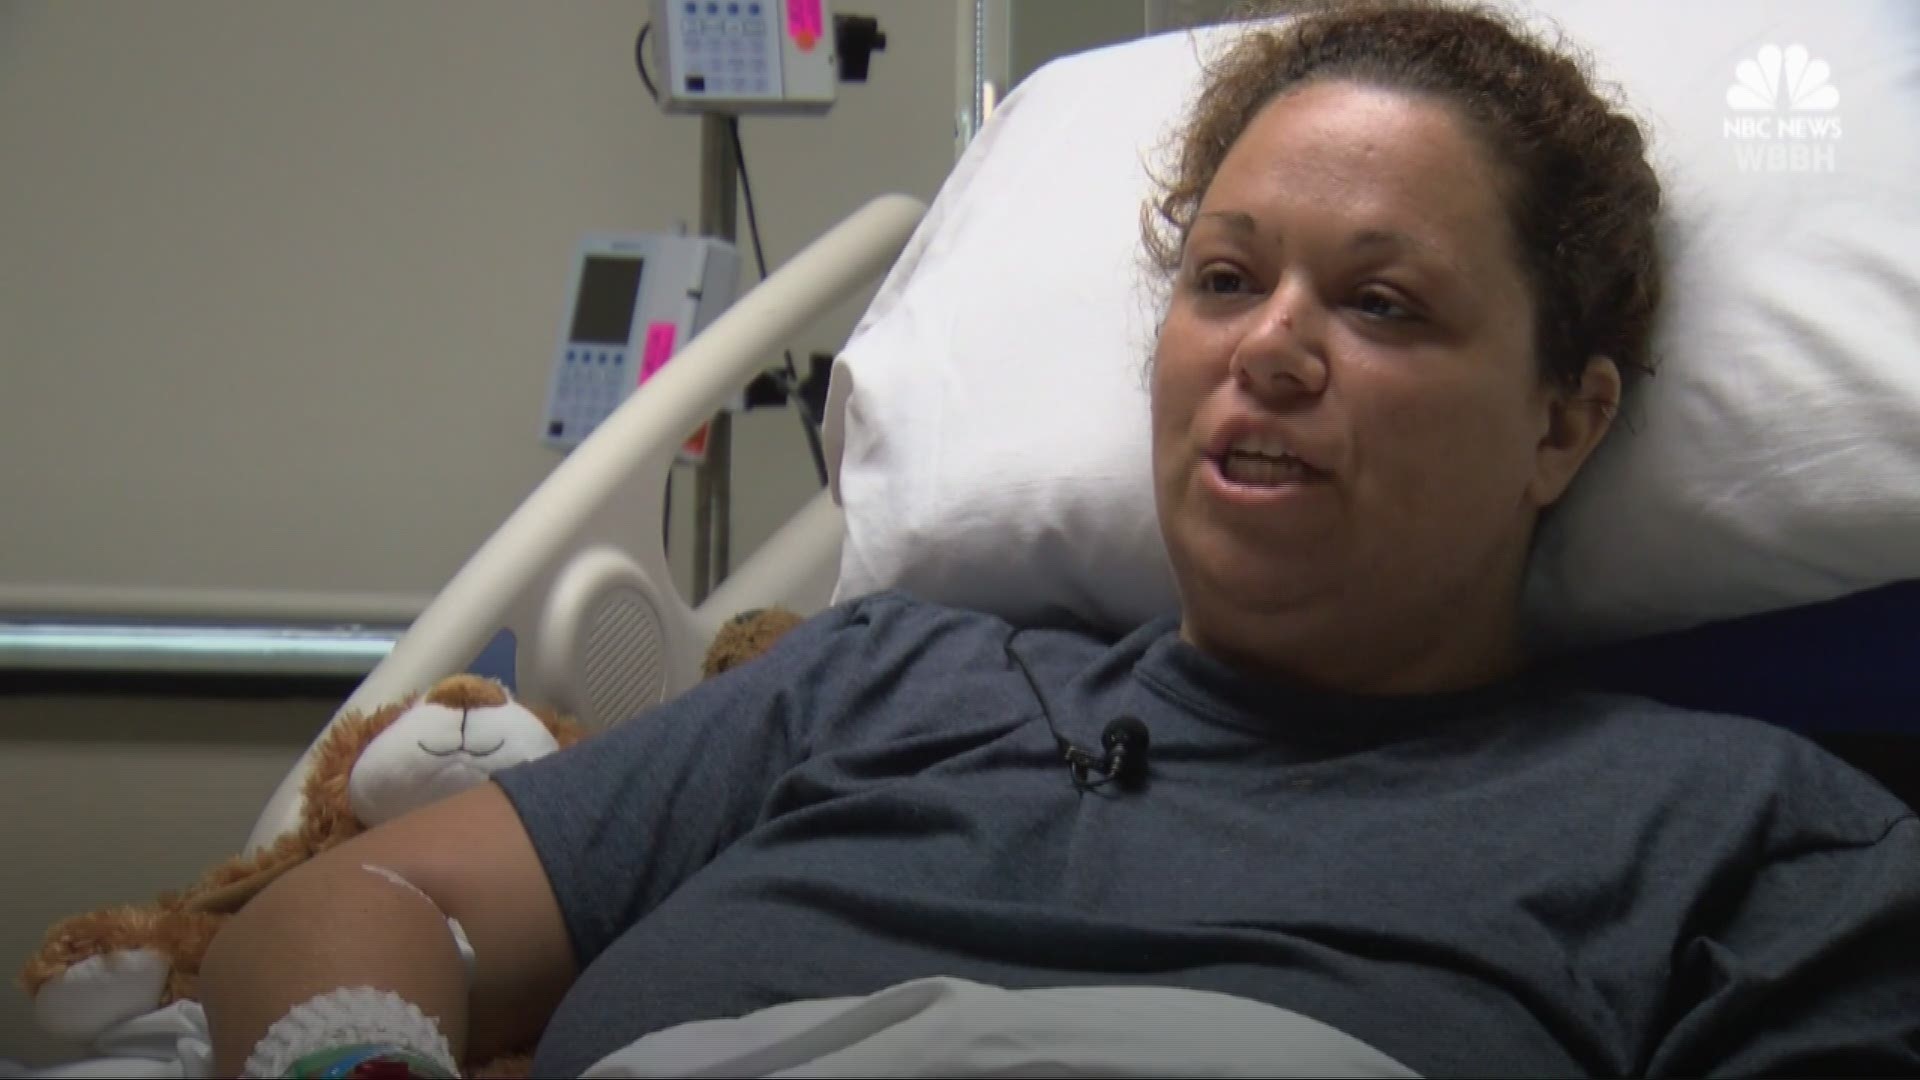 Florida mother of five stops to help crash victim on I-75, then loses her legs when another vehicle plows into the crash site.